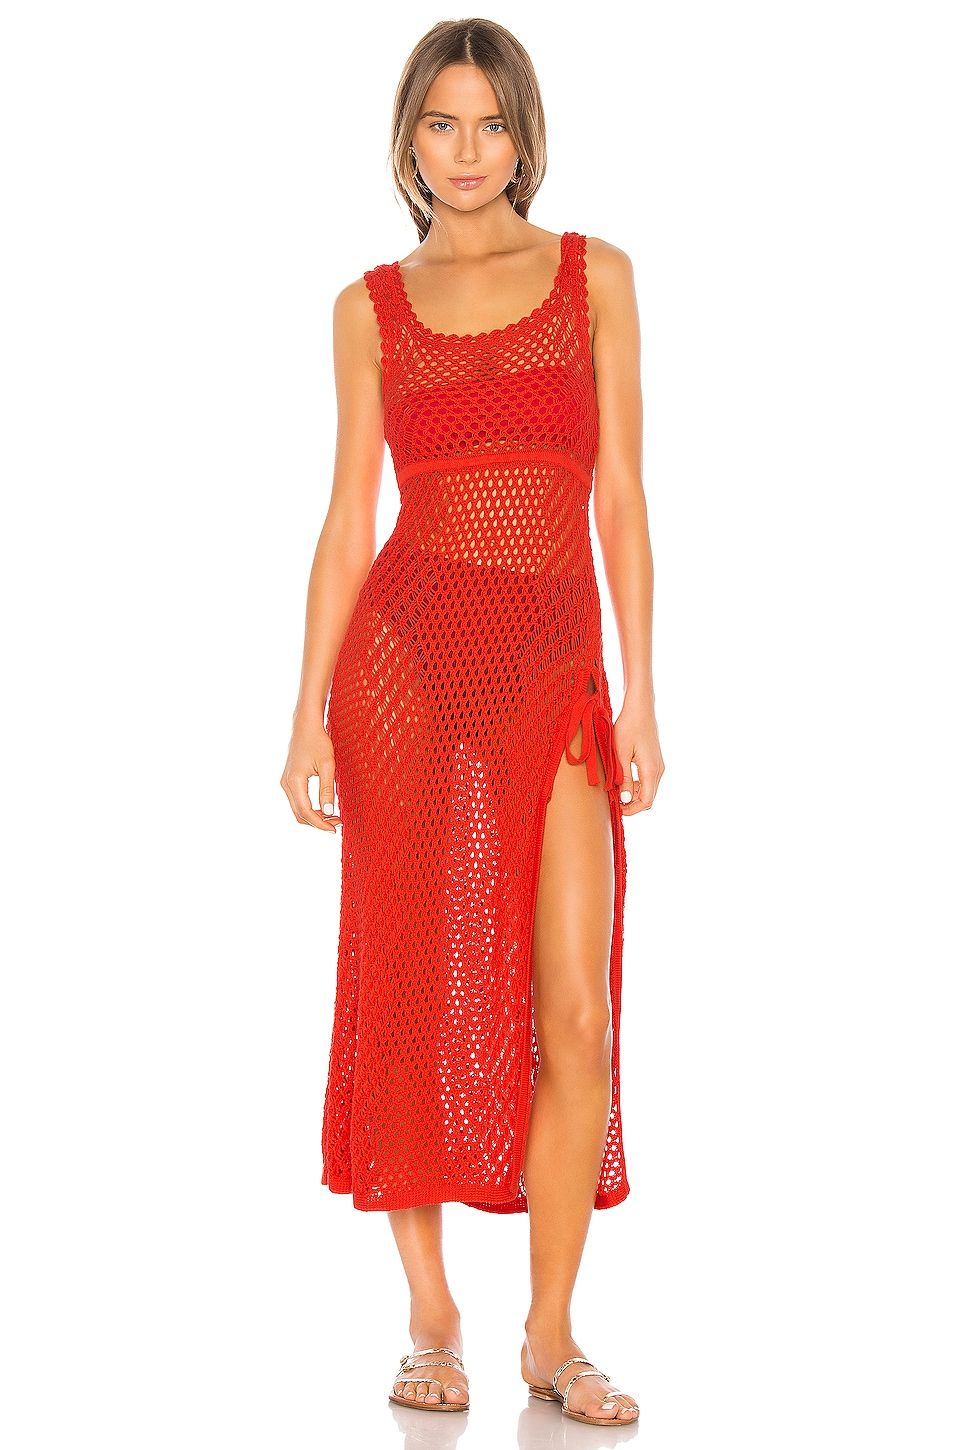 Athena Crochet Dress in Coral Red